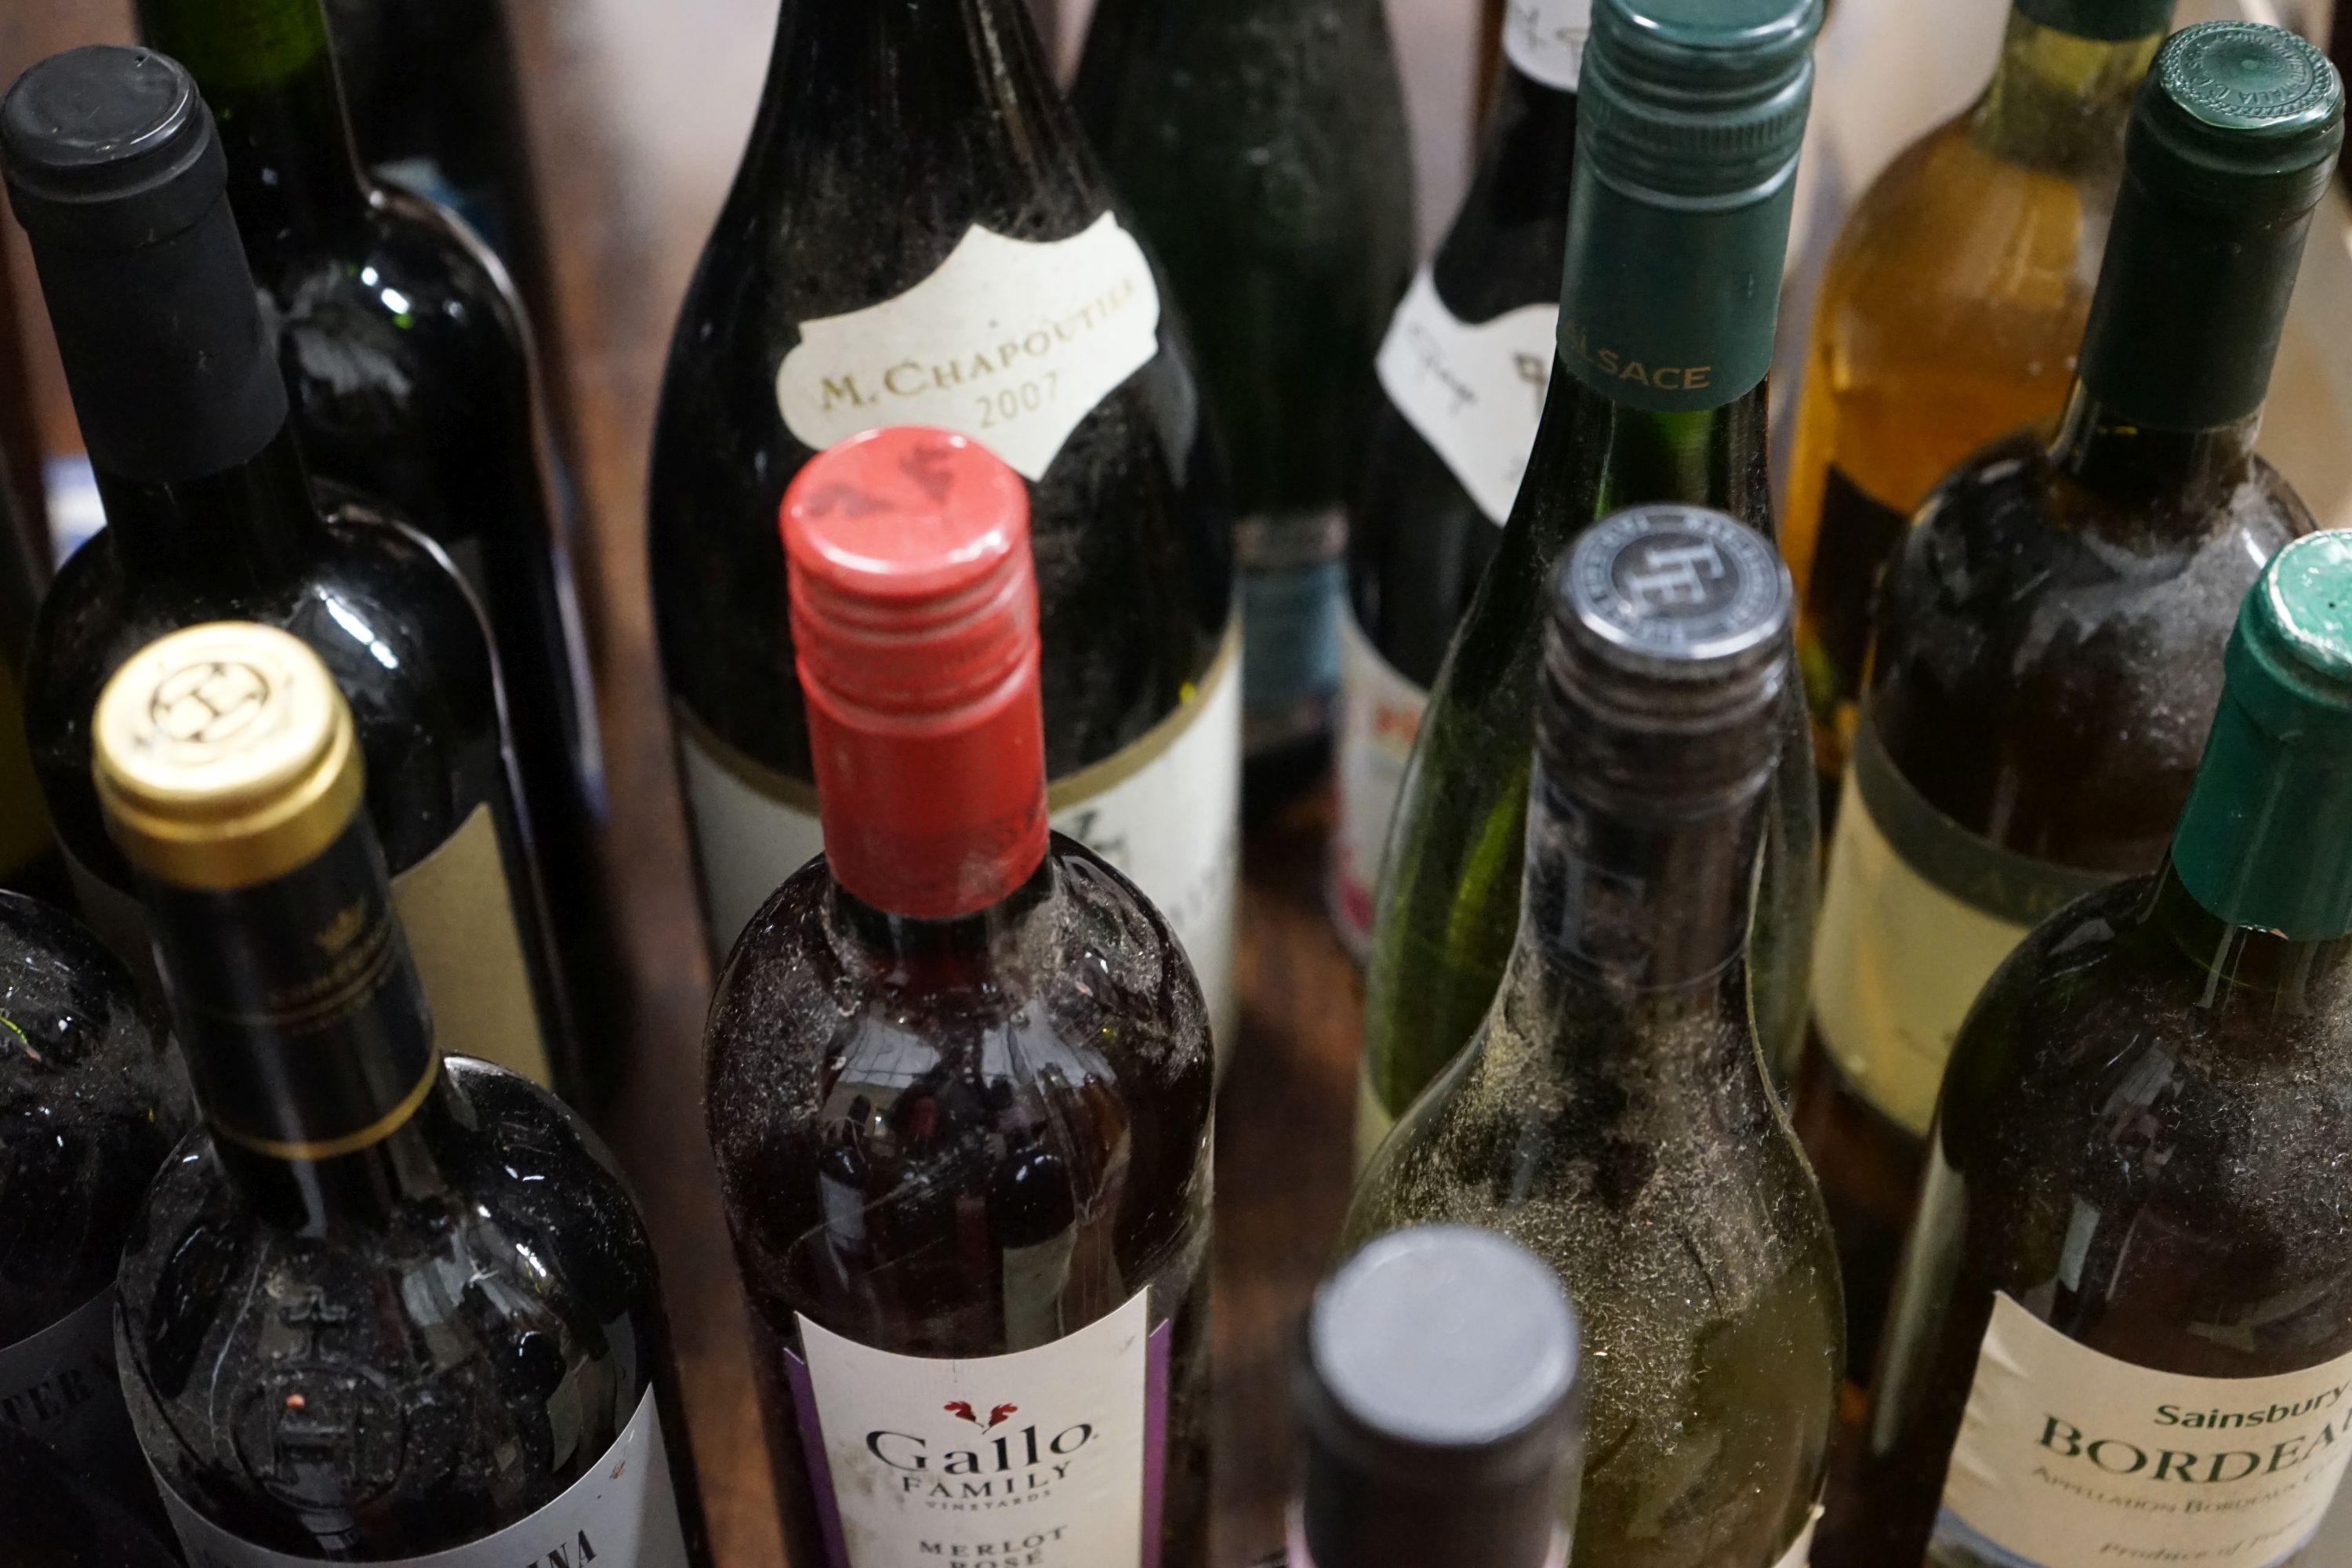 Forty-six bottles of assorted red, white and rose wines, assorted ciders